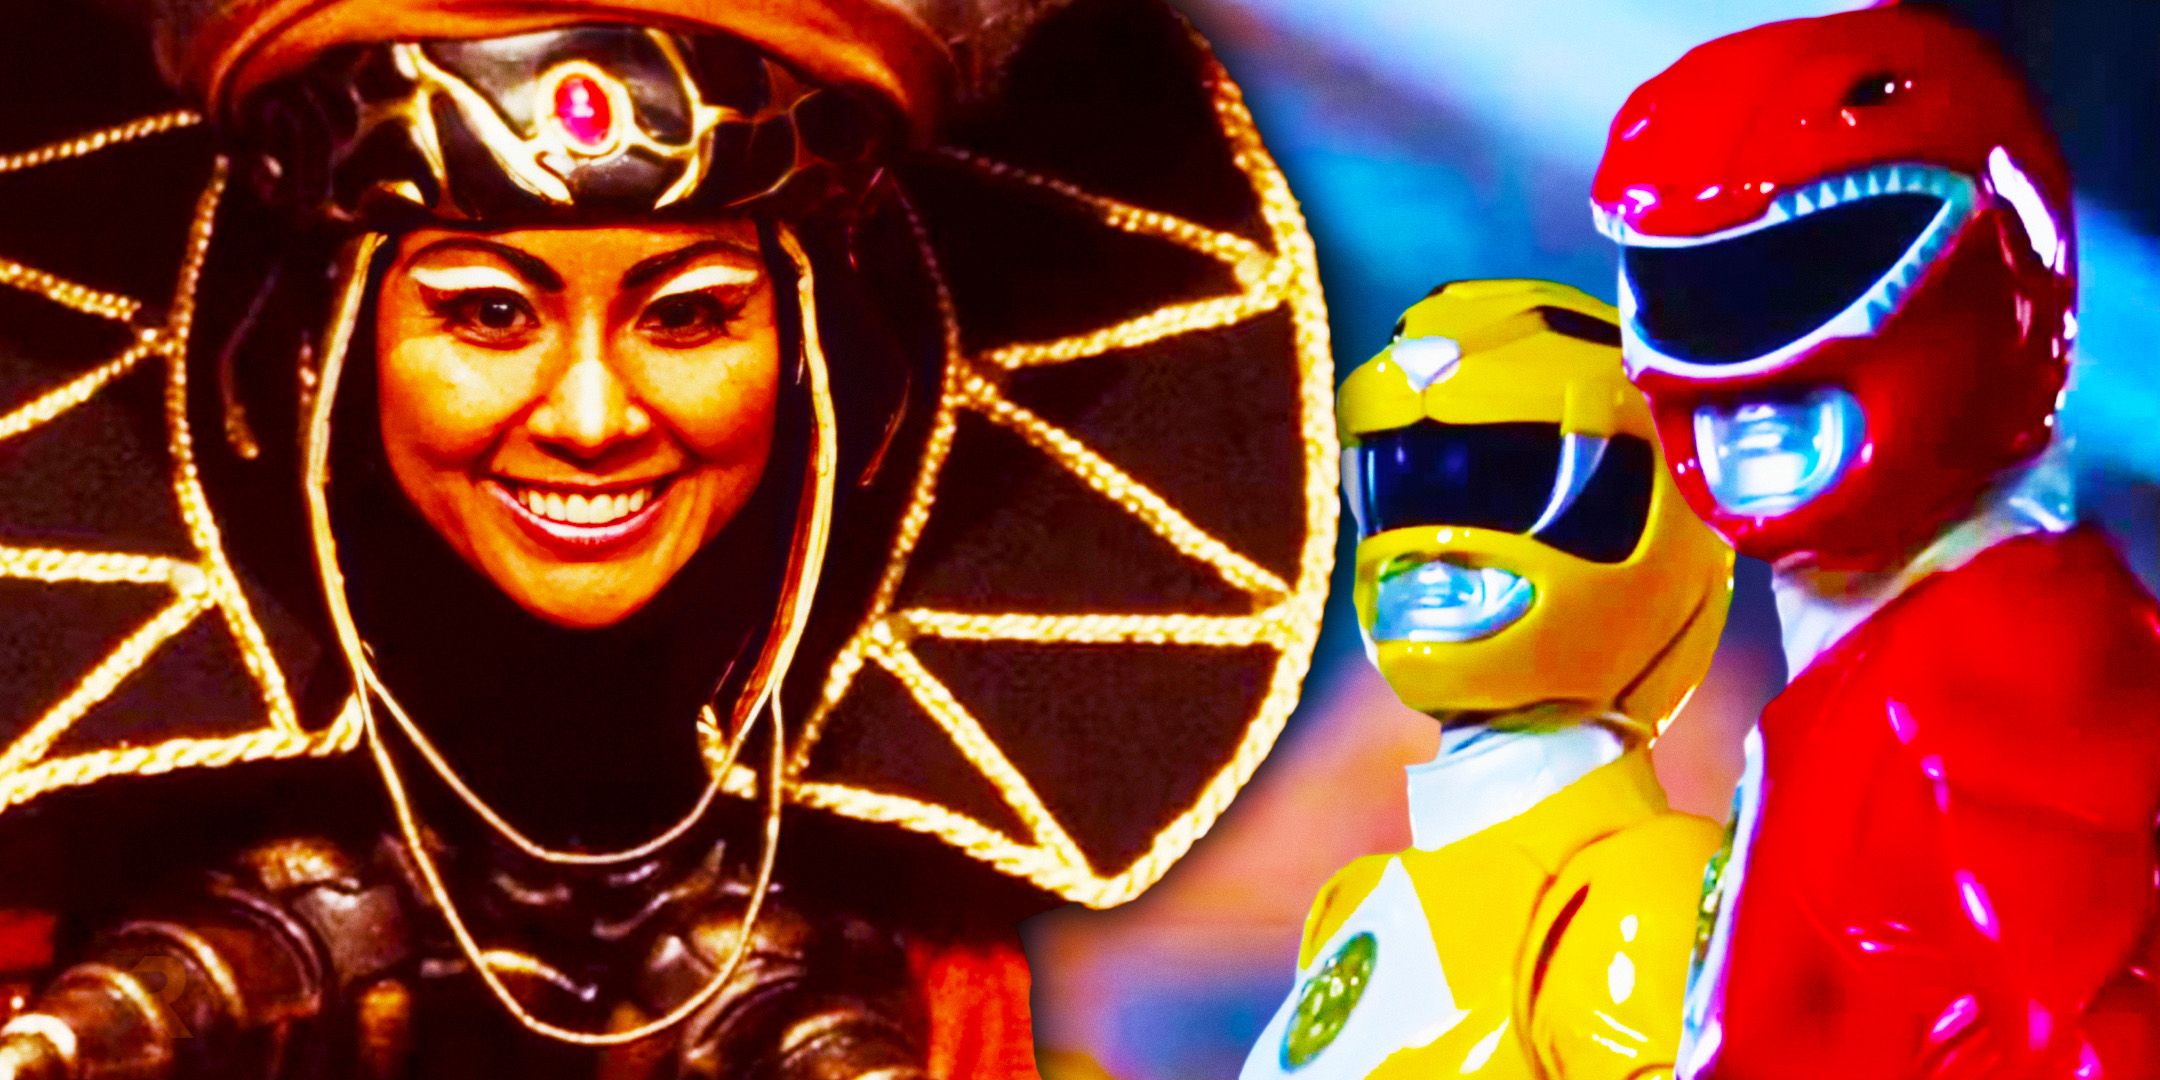 Rita Repulsa, the Yellow Ranger, and the Red Ranger in 1995 Power Rangers: The Movie